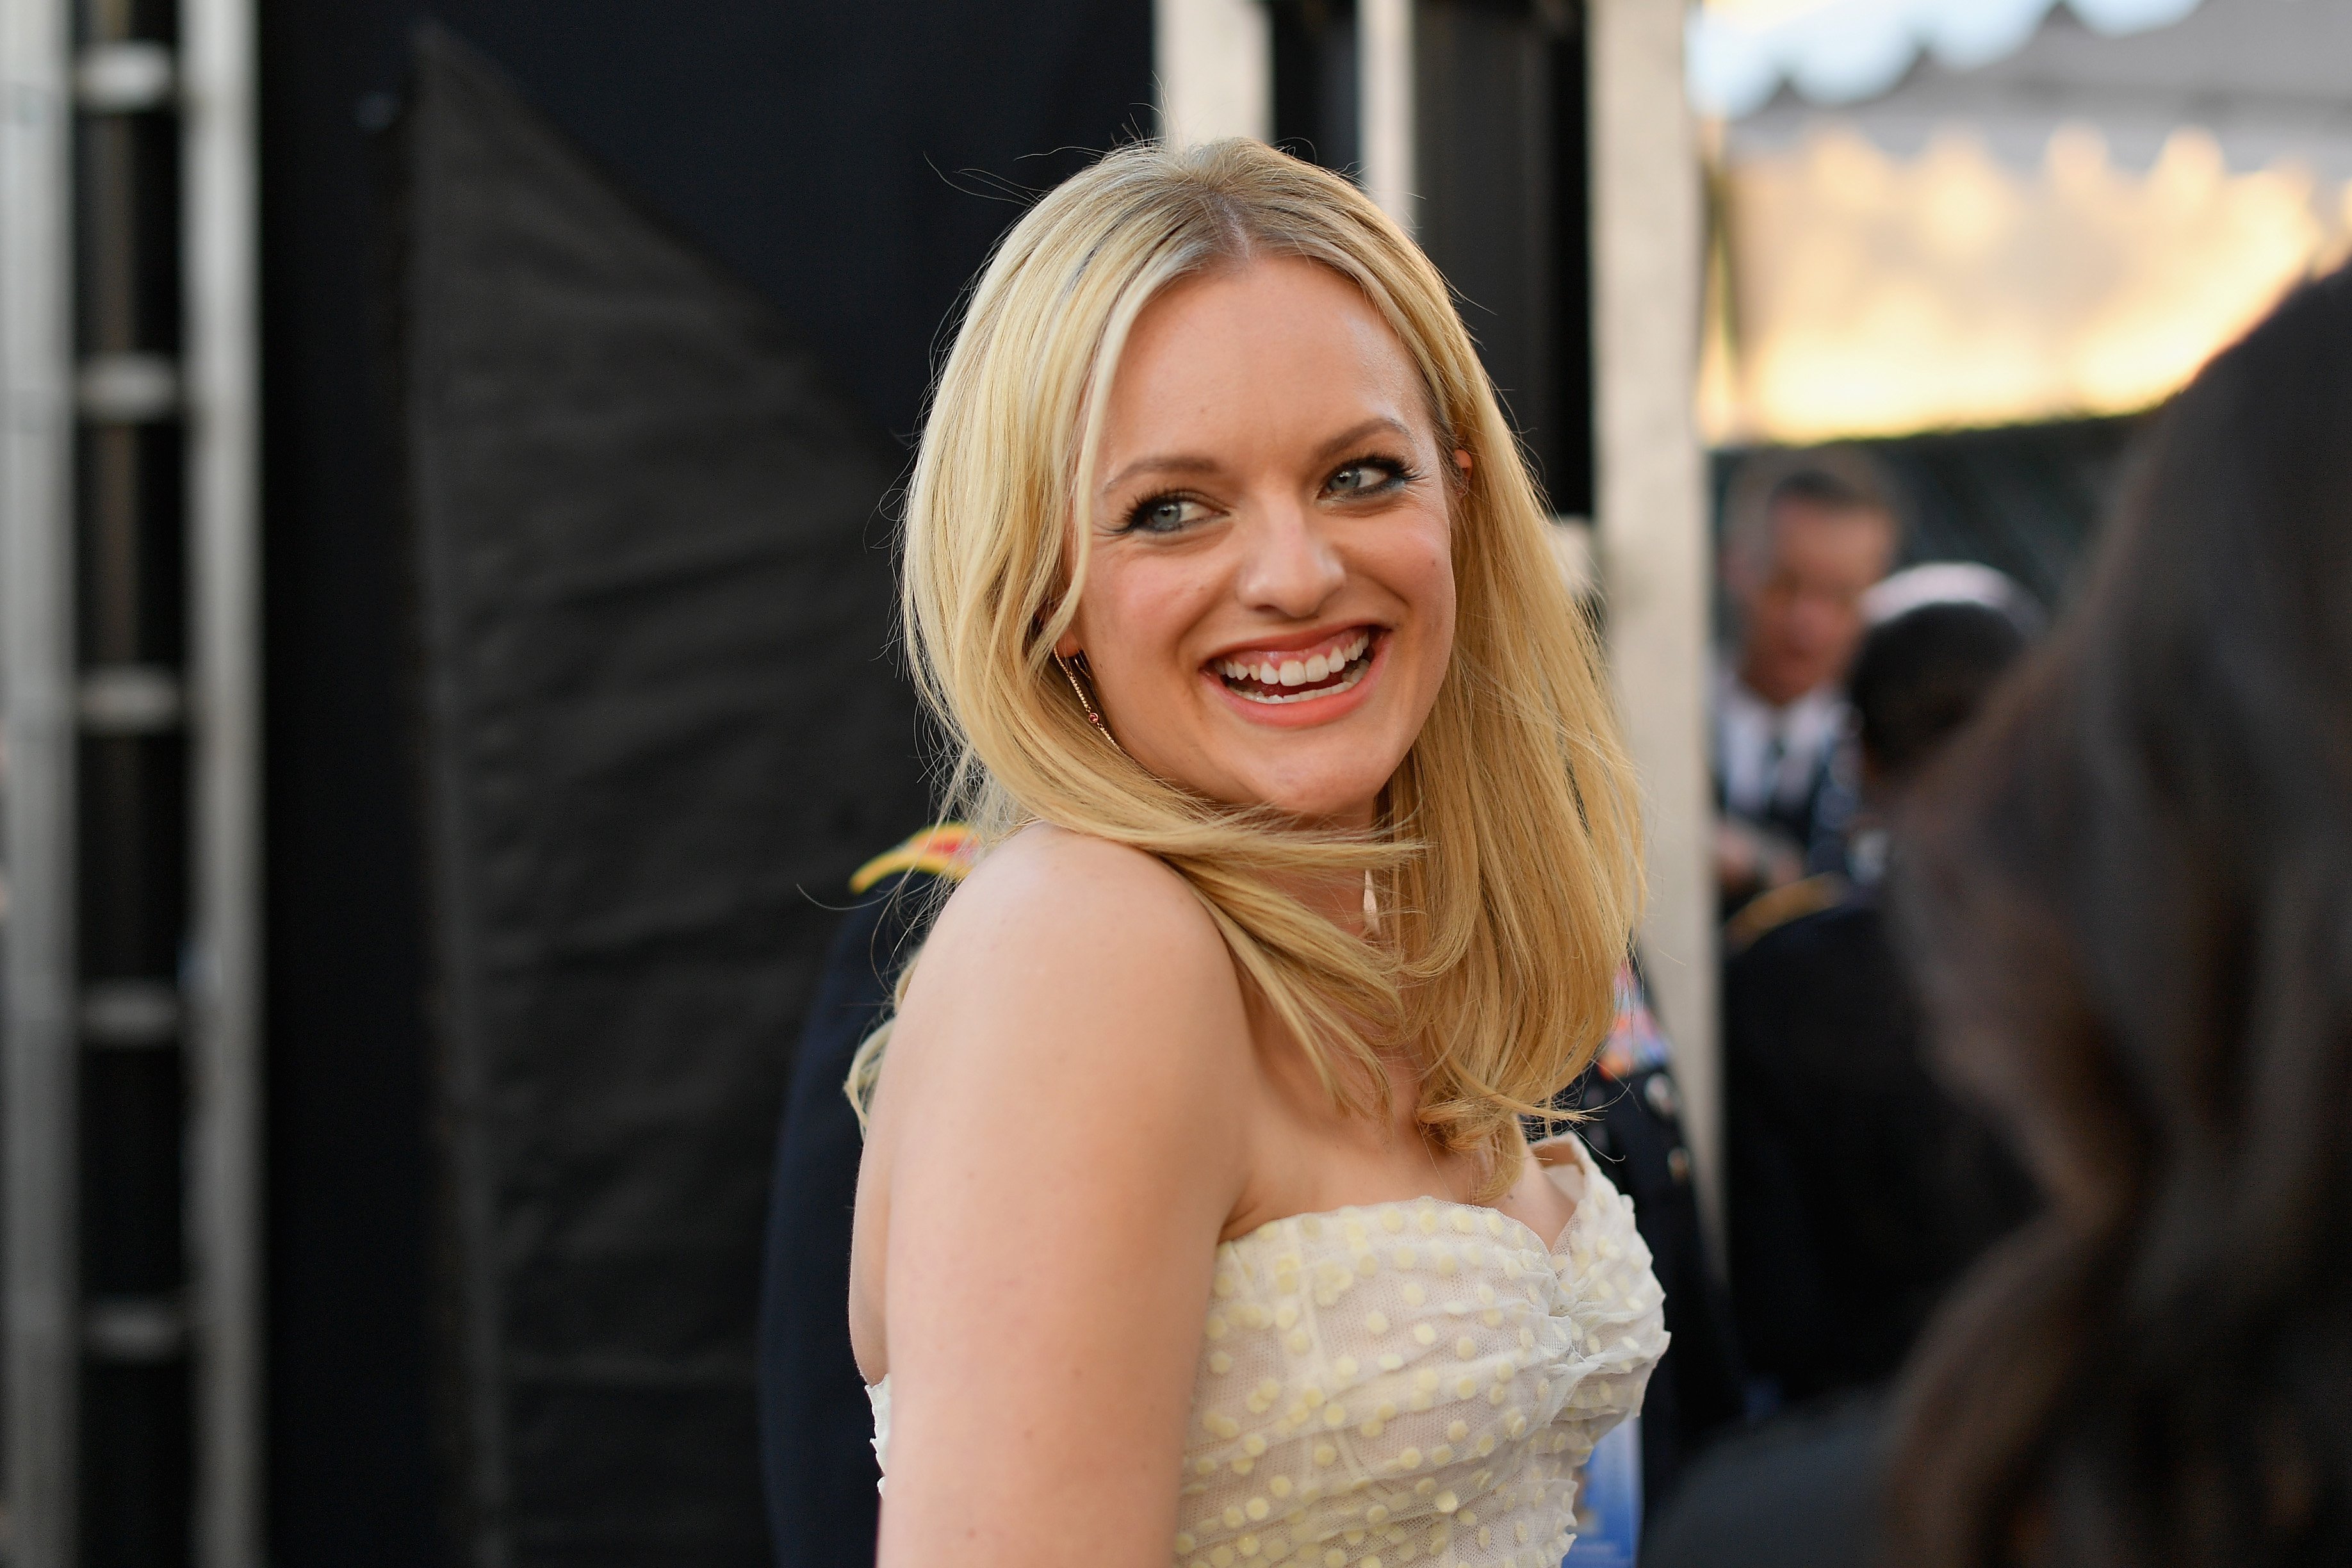 Elisabeth Moss attends the 25th Annual Screen Actors Guild Awards in Los Angeles on January 27, 2019 | Photo: Getty Images